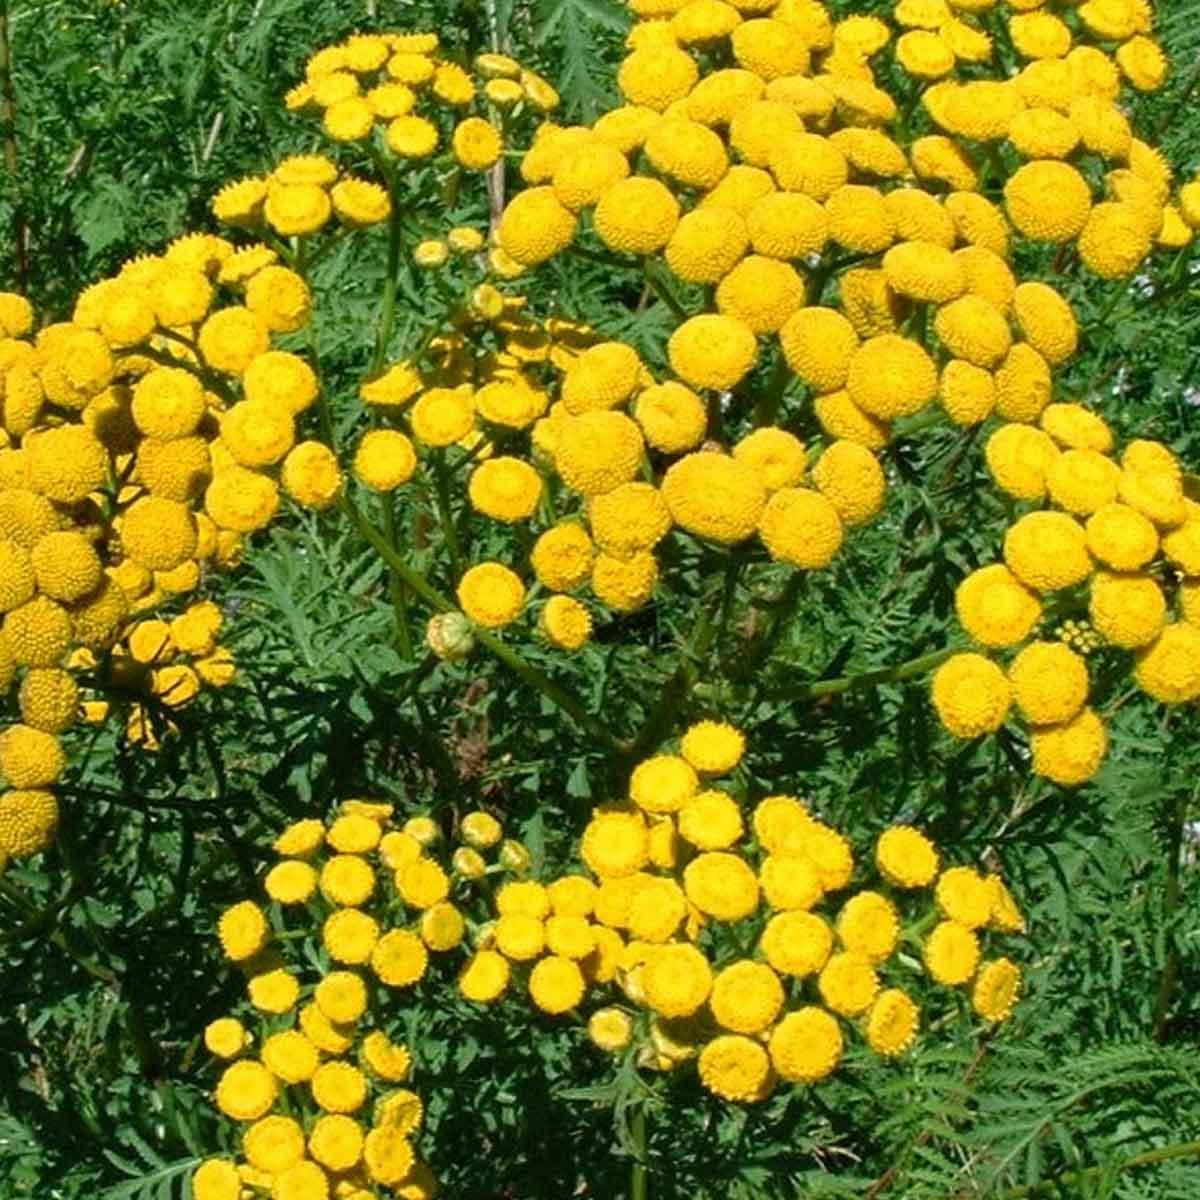 Blue Tansy Essential Oil Uses